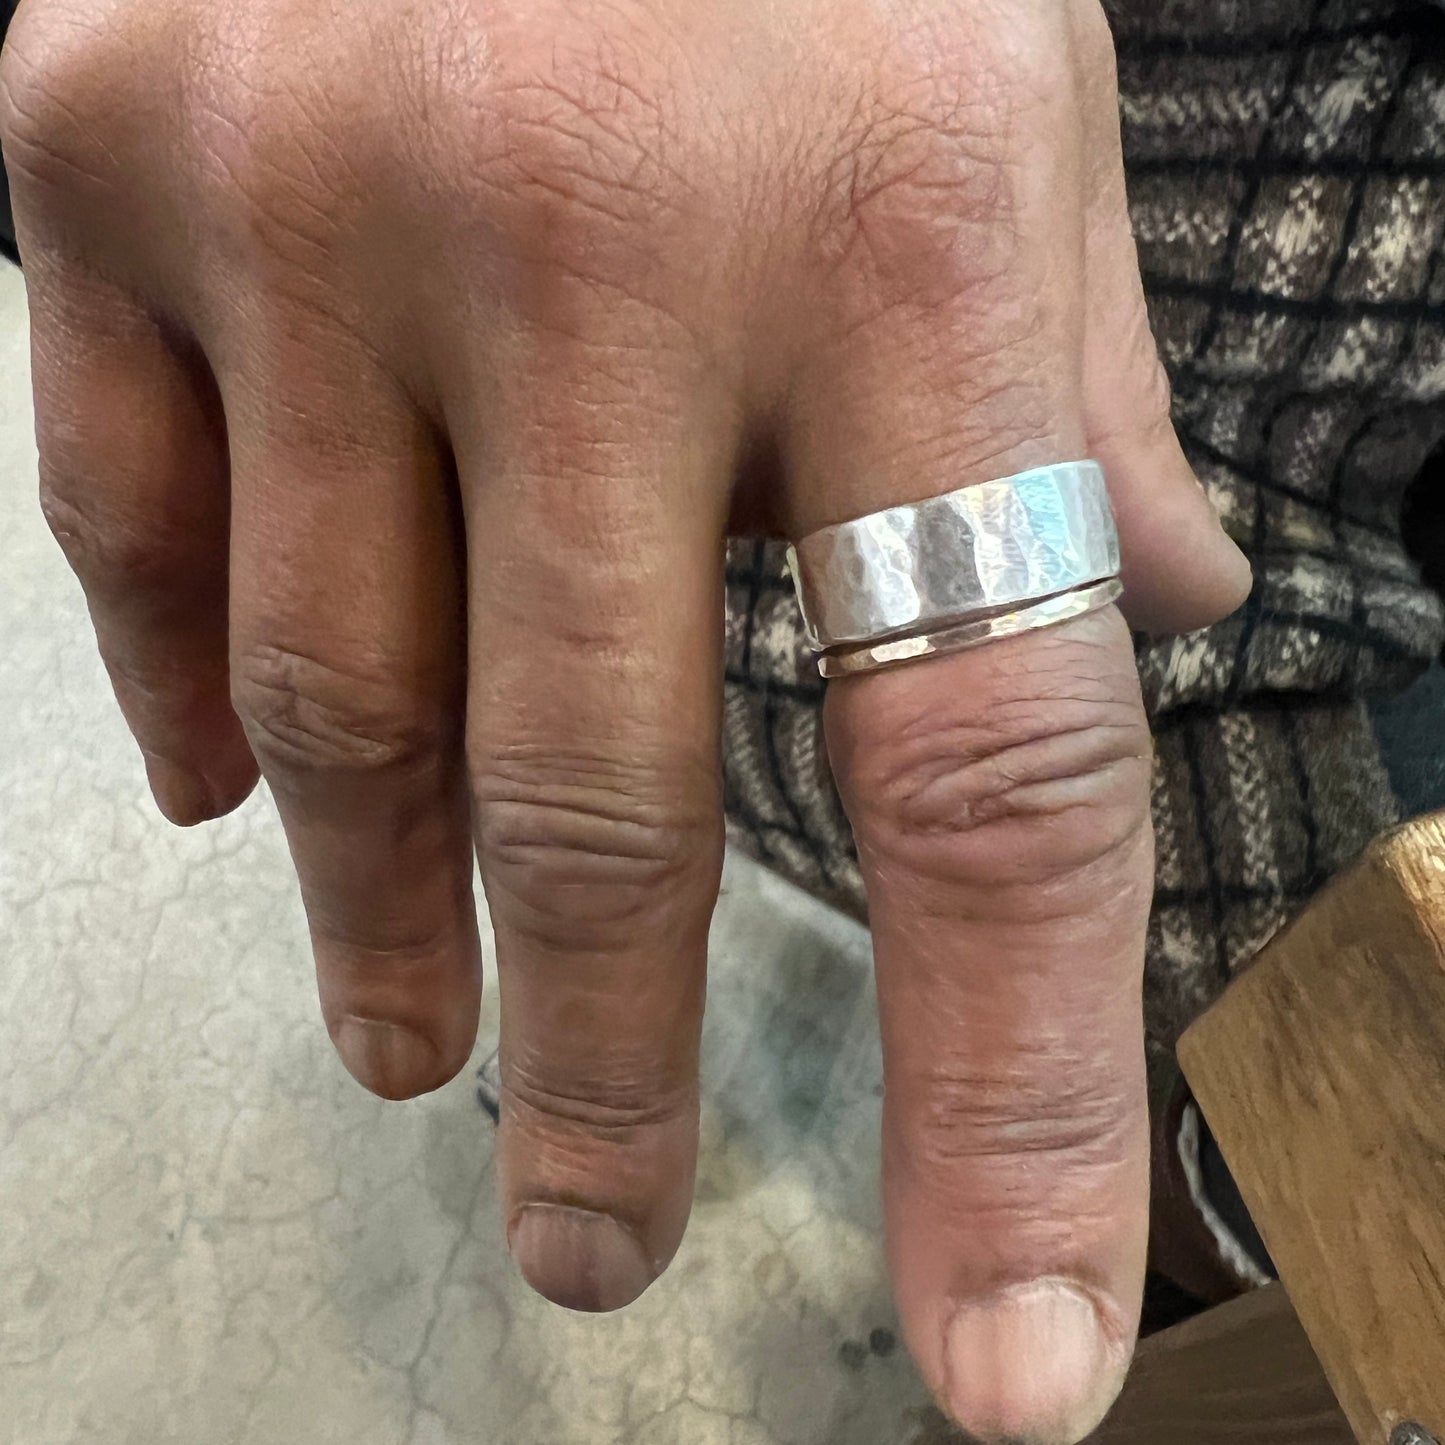 Stacking Rings and Wide Band Rings - 3 hours